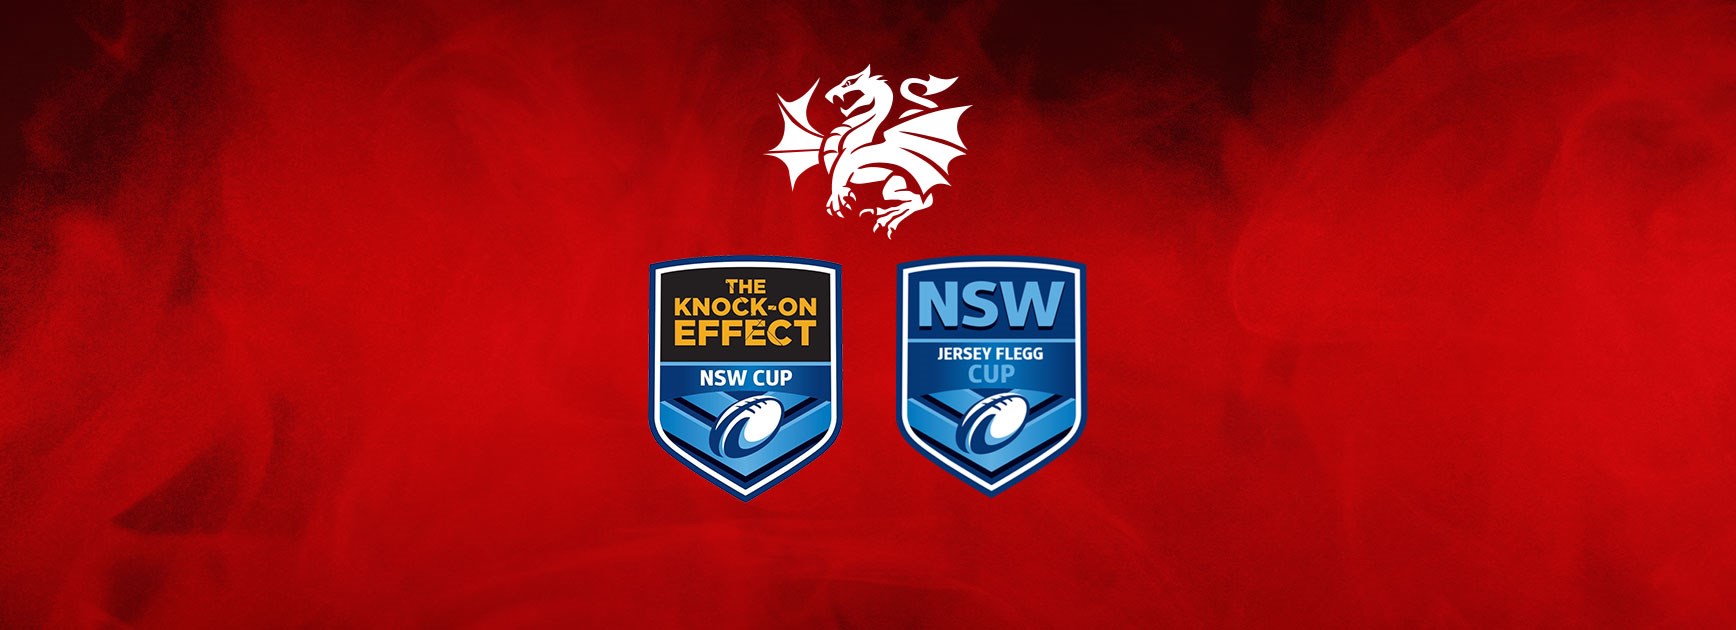 Knock-On Effect NSW Cup: Dragons fall to Warriors in heartbreaker